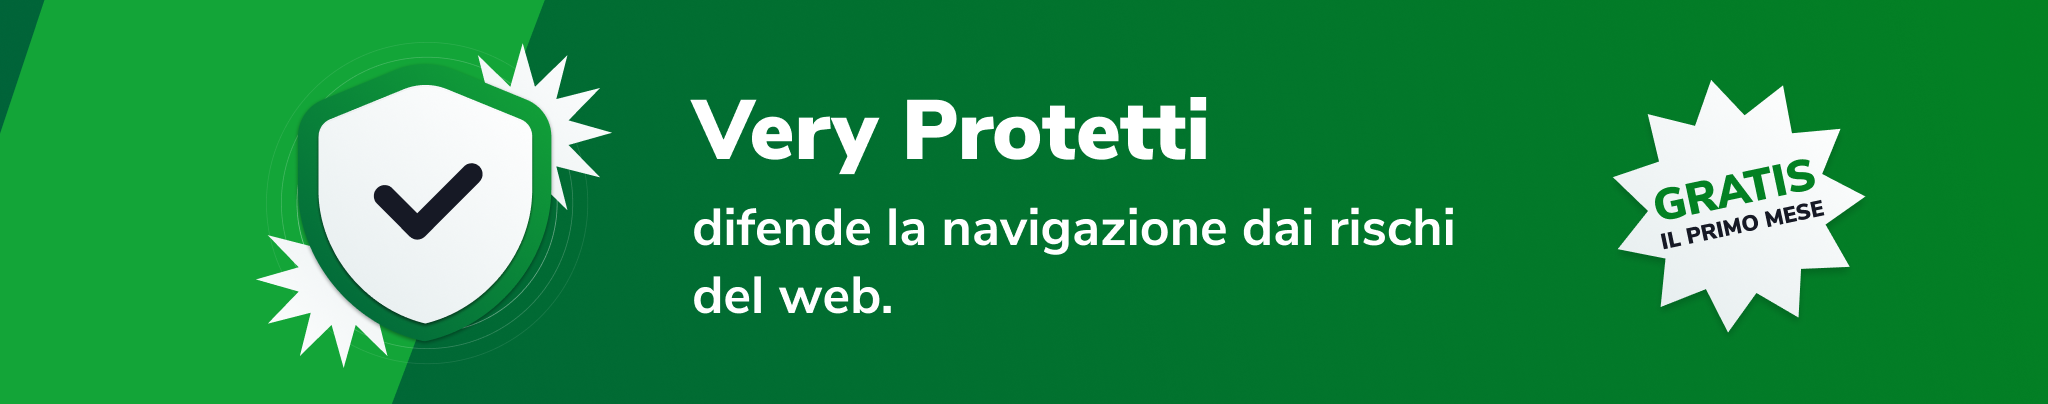 very-protetti-tablet